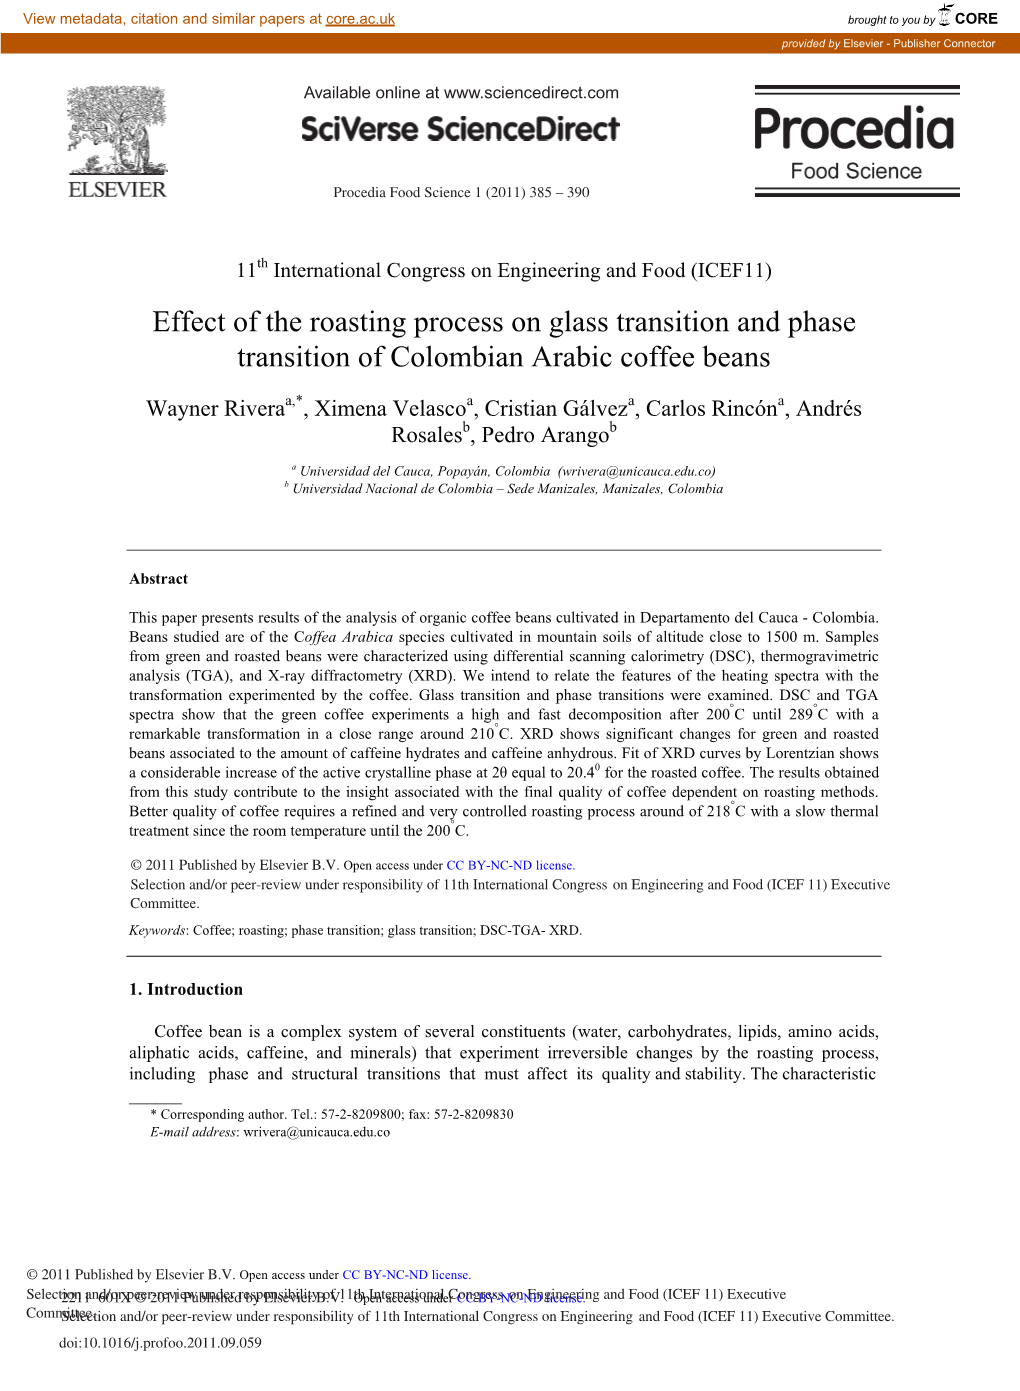 Effect of the Roasting Process on Glass Transition and Phase Transition of Colombian Arabic Coffee Beans